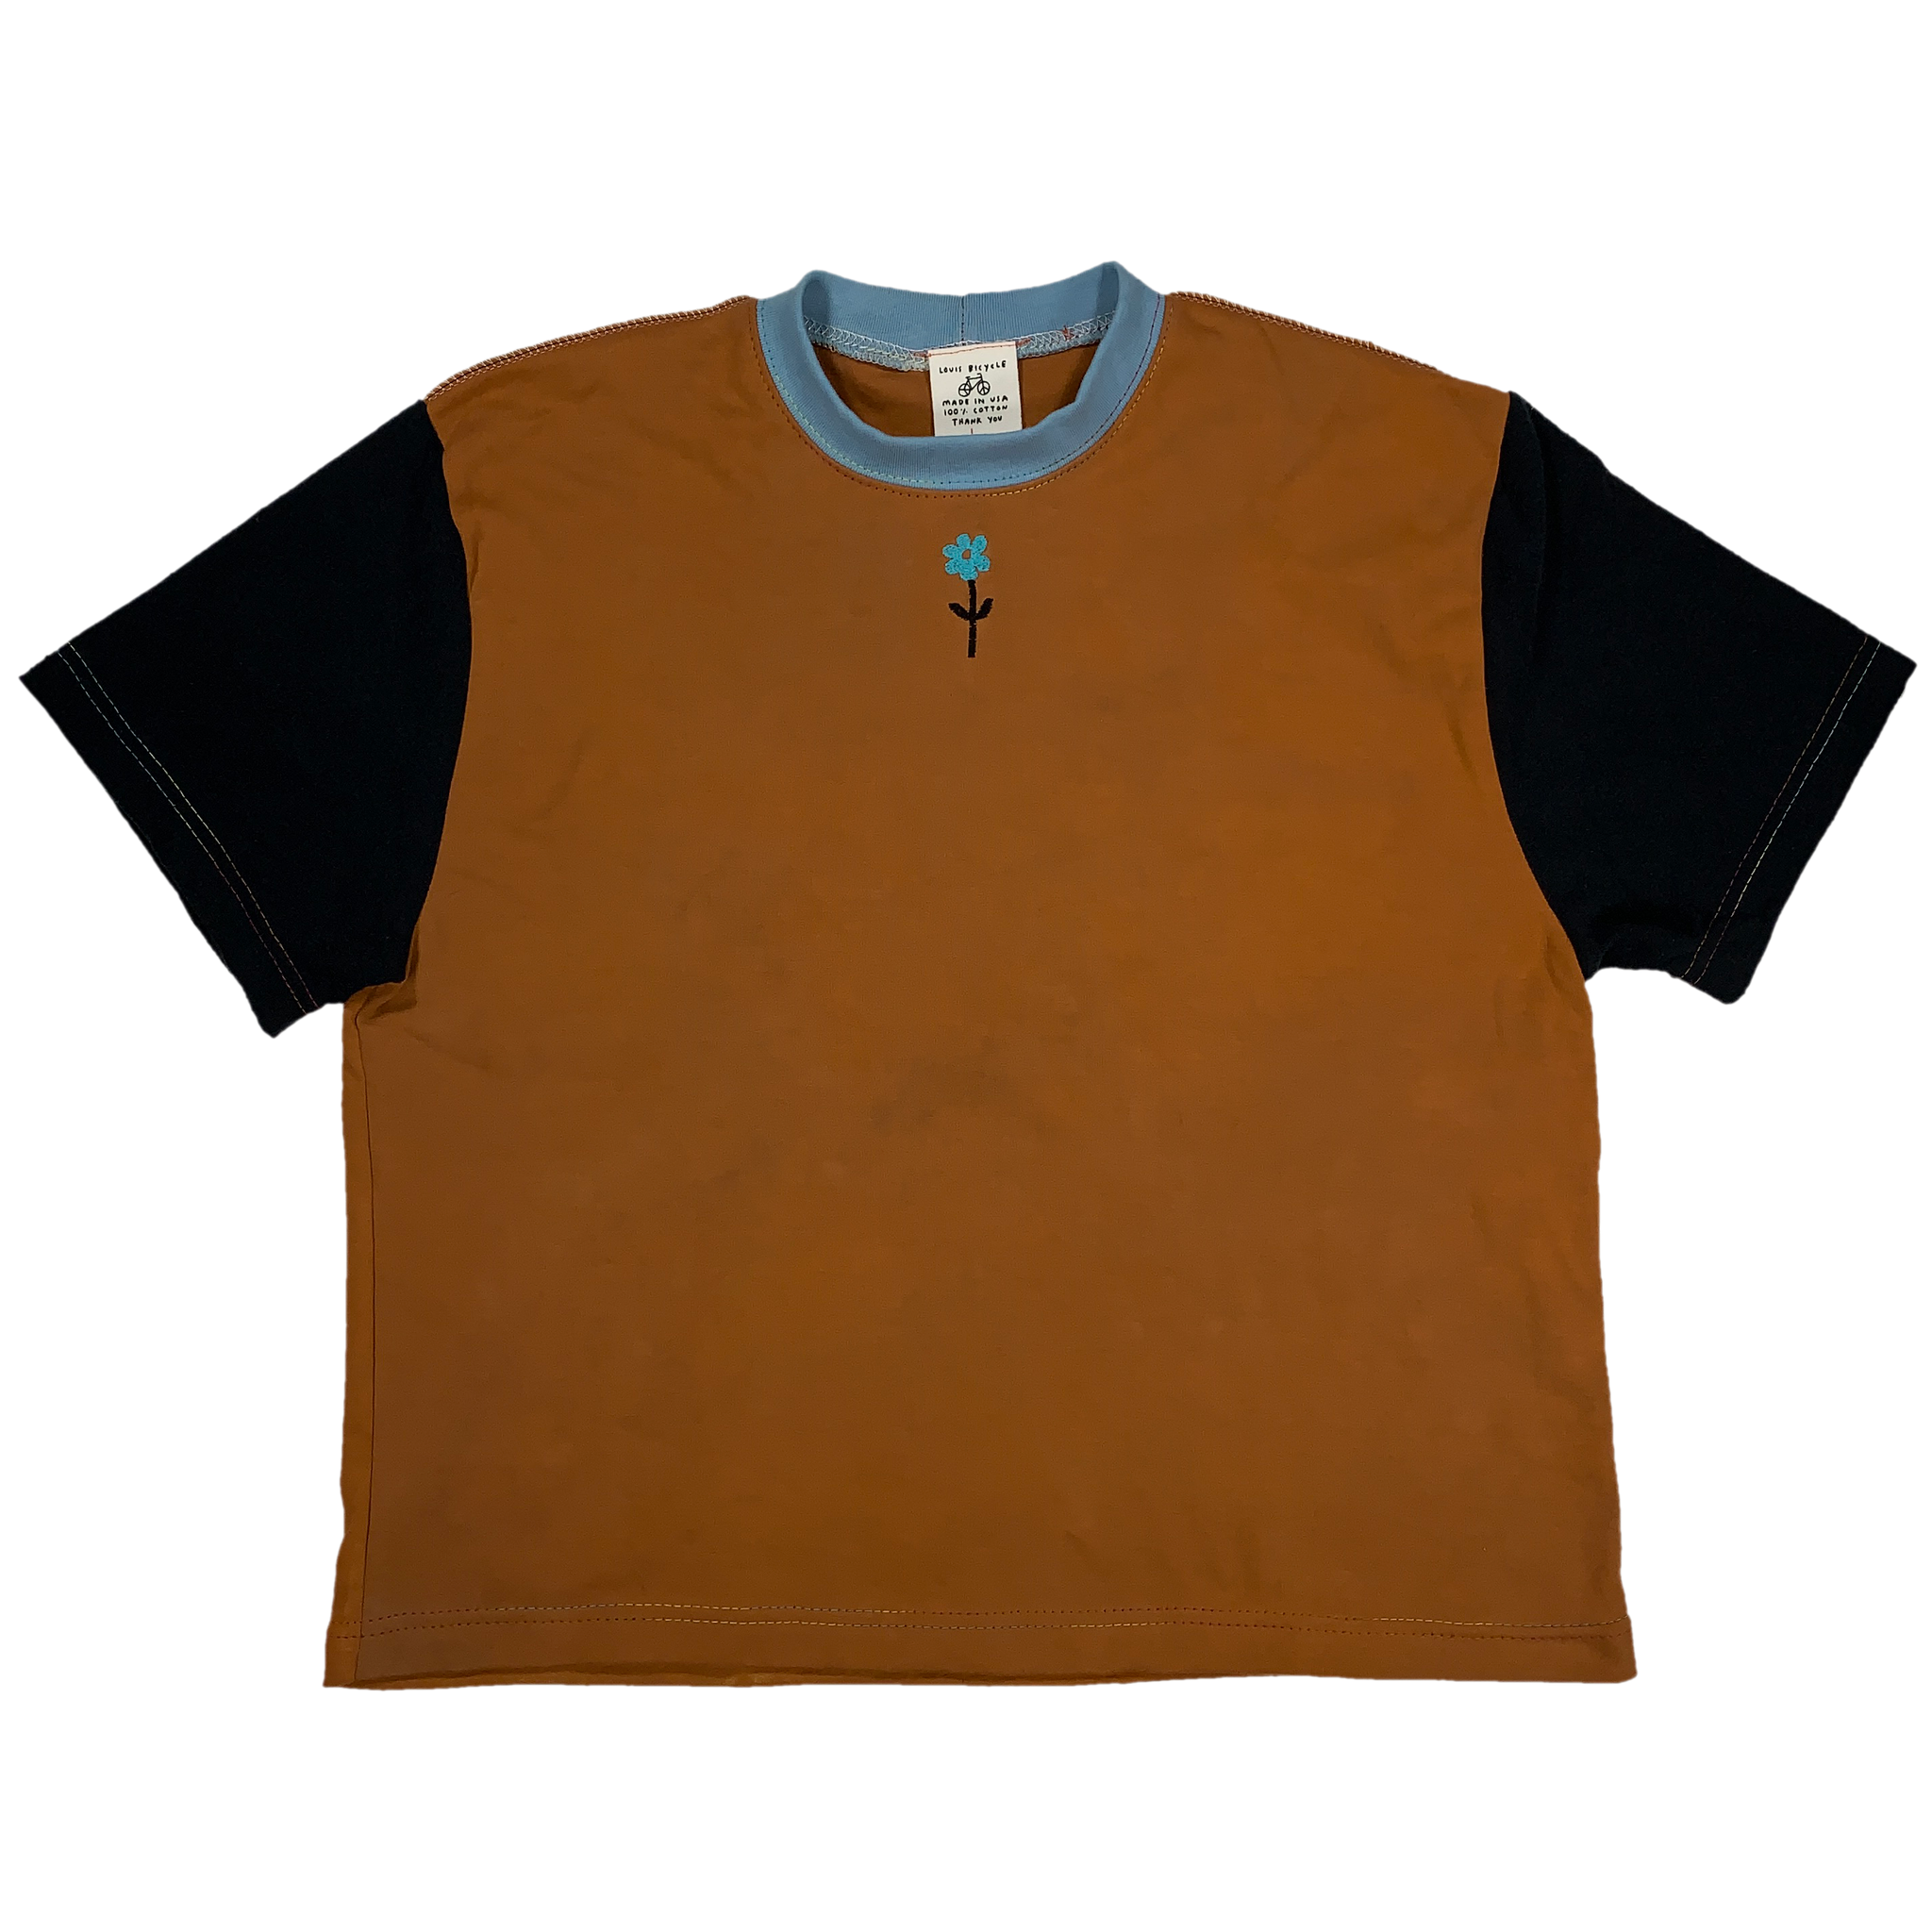 Home sewn crop tee - organic + secondhand cotton - embroidered and dyed - L